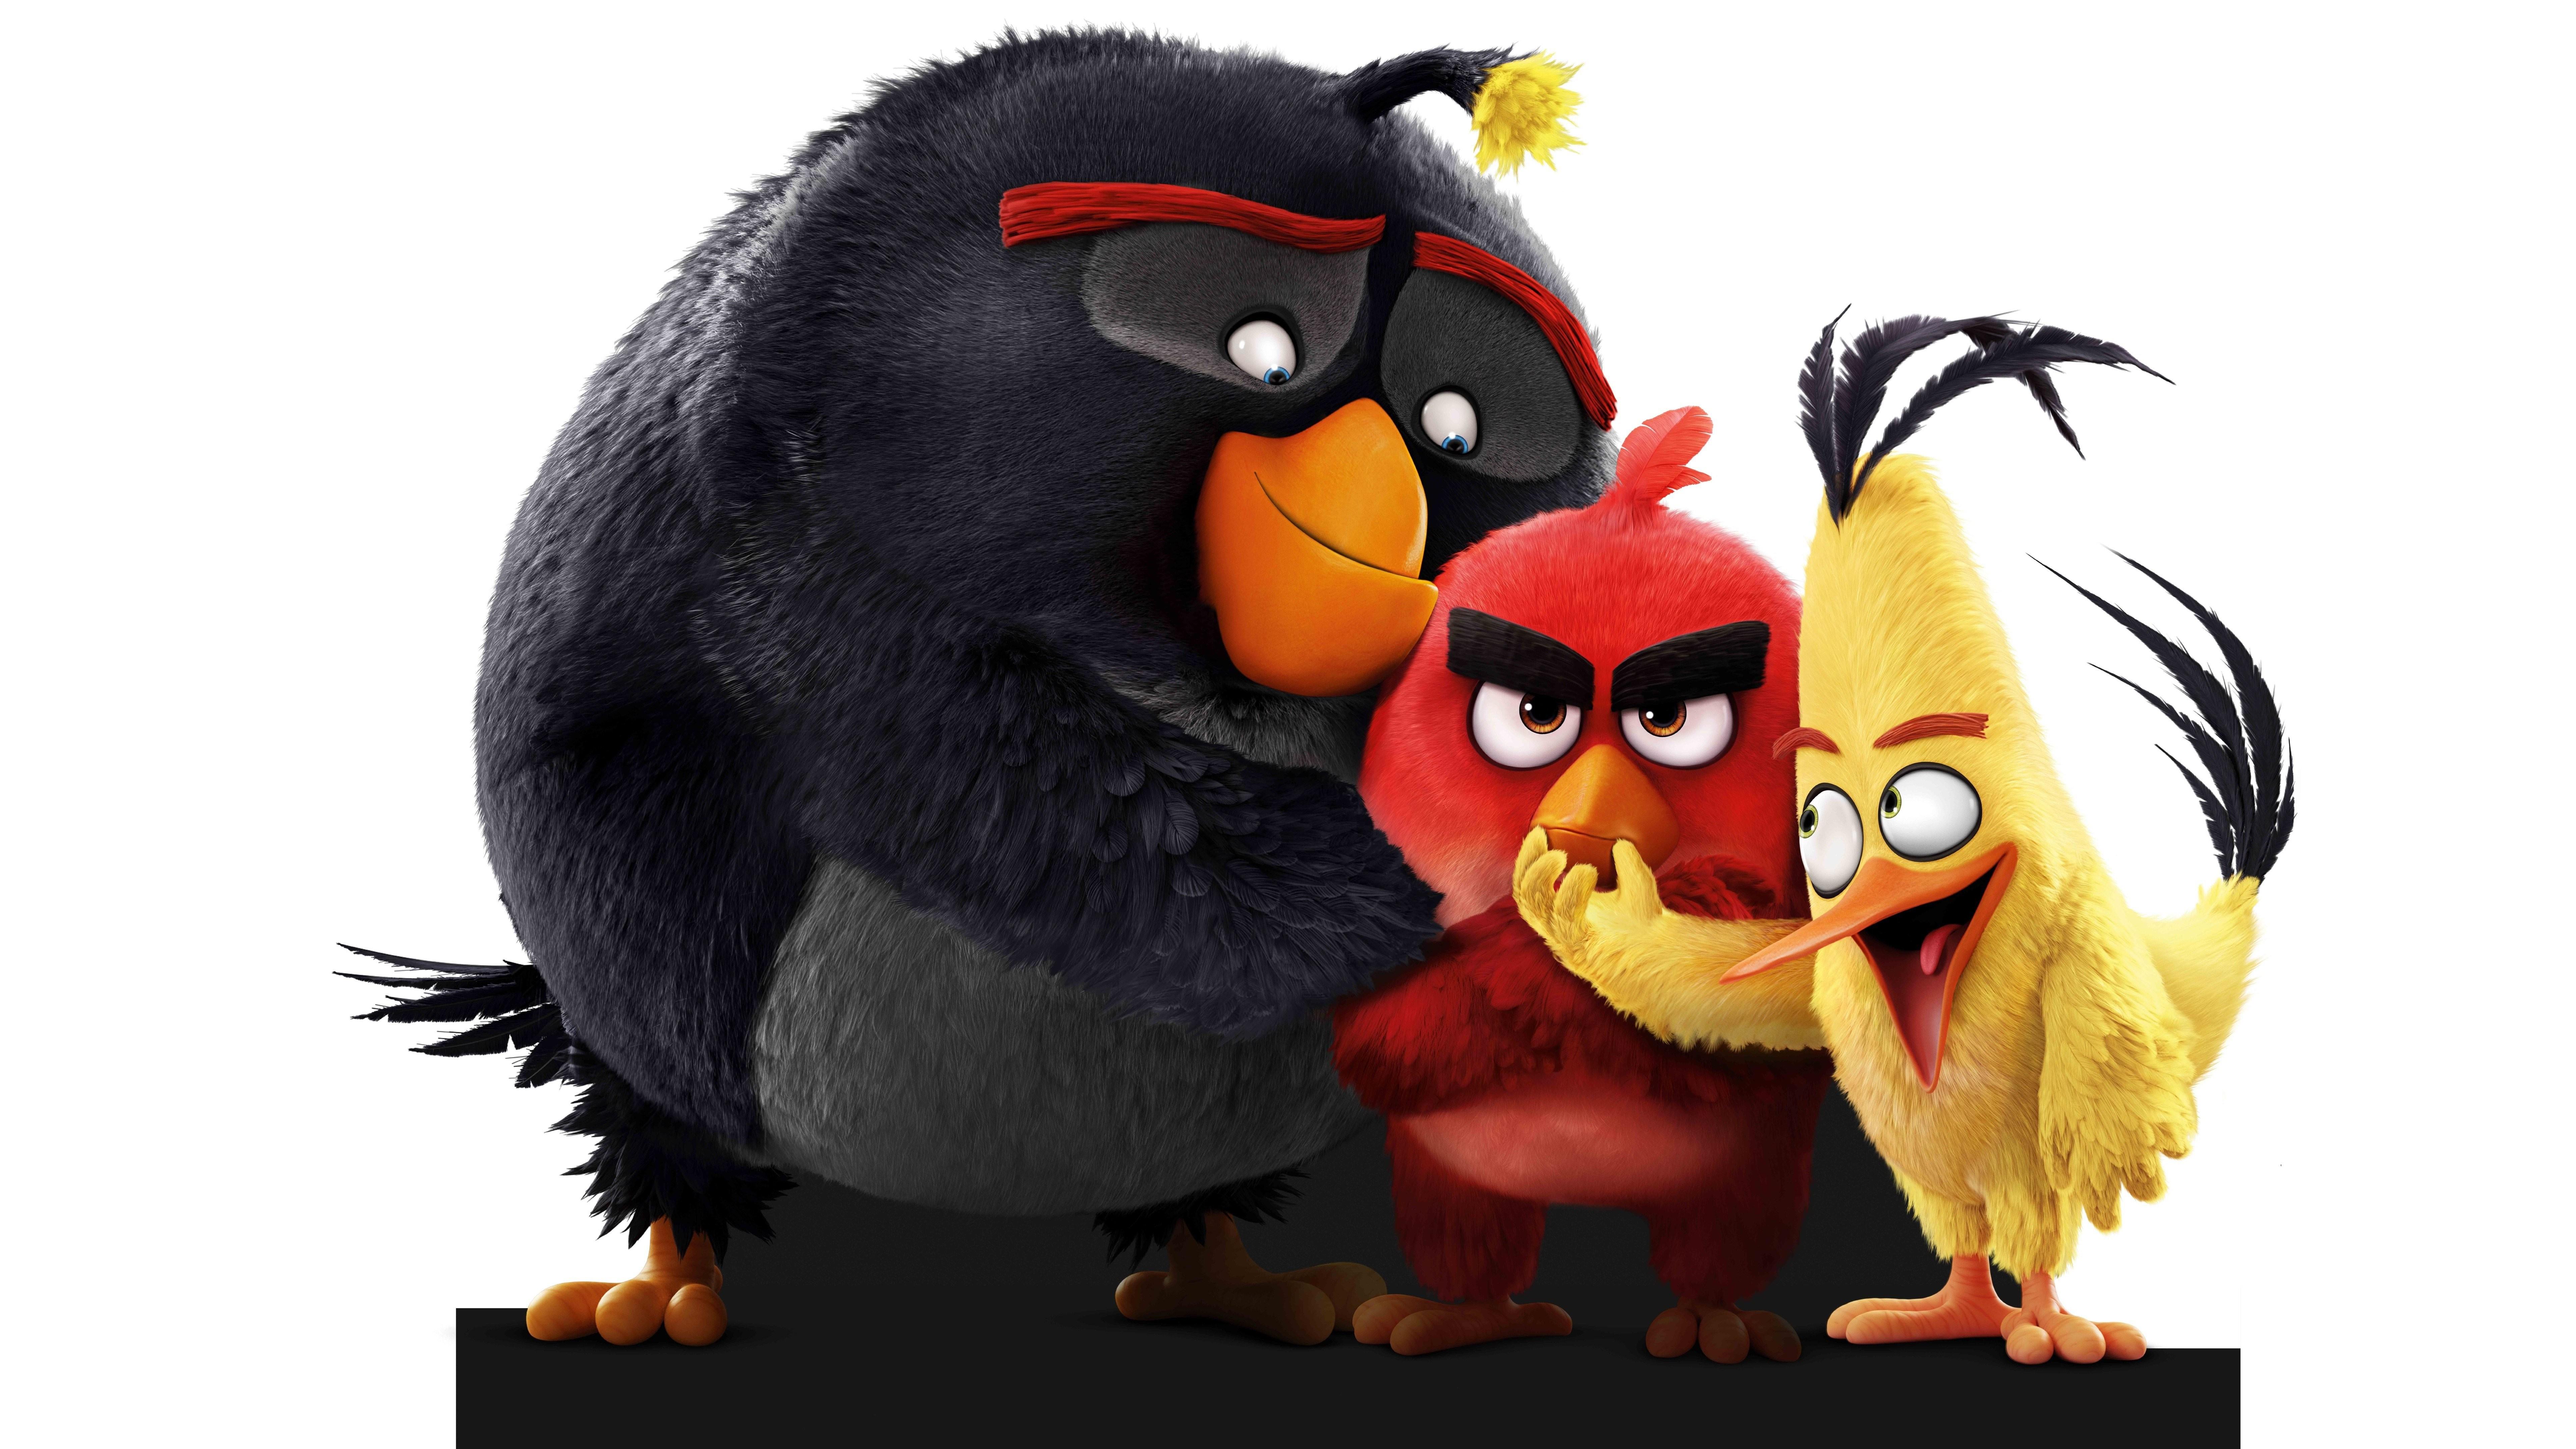 The Angry Birds 8k 8k HD 4k Wallpaper, Image, Background, Photo and Picture